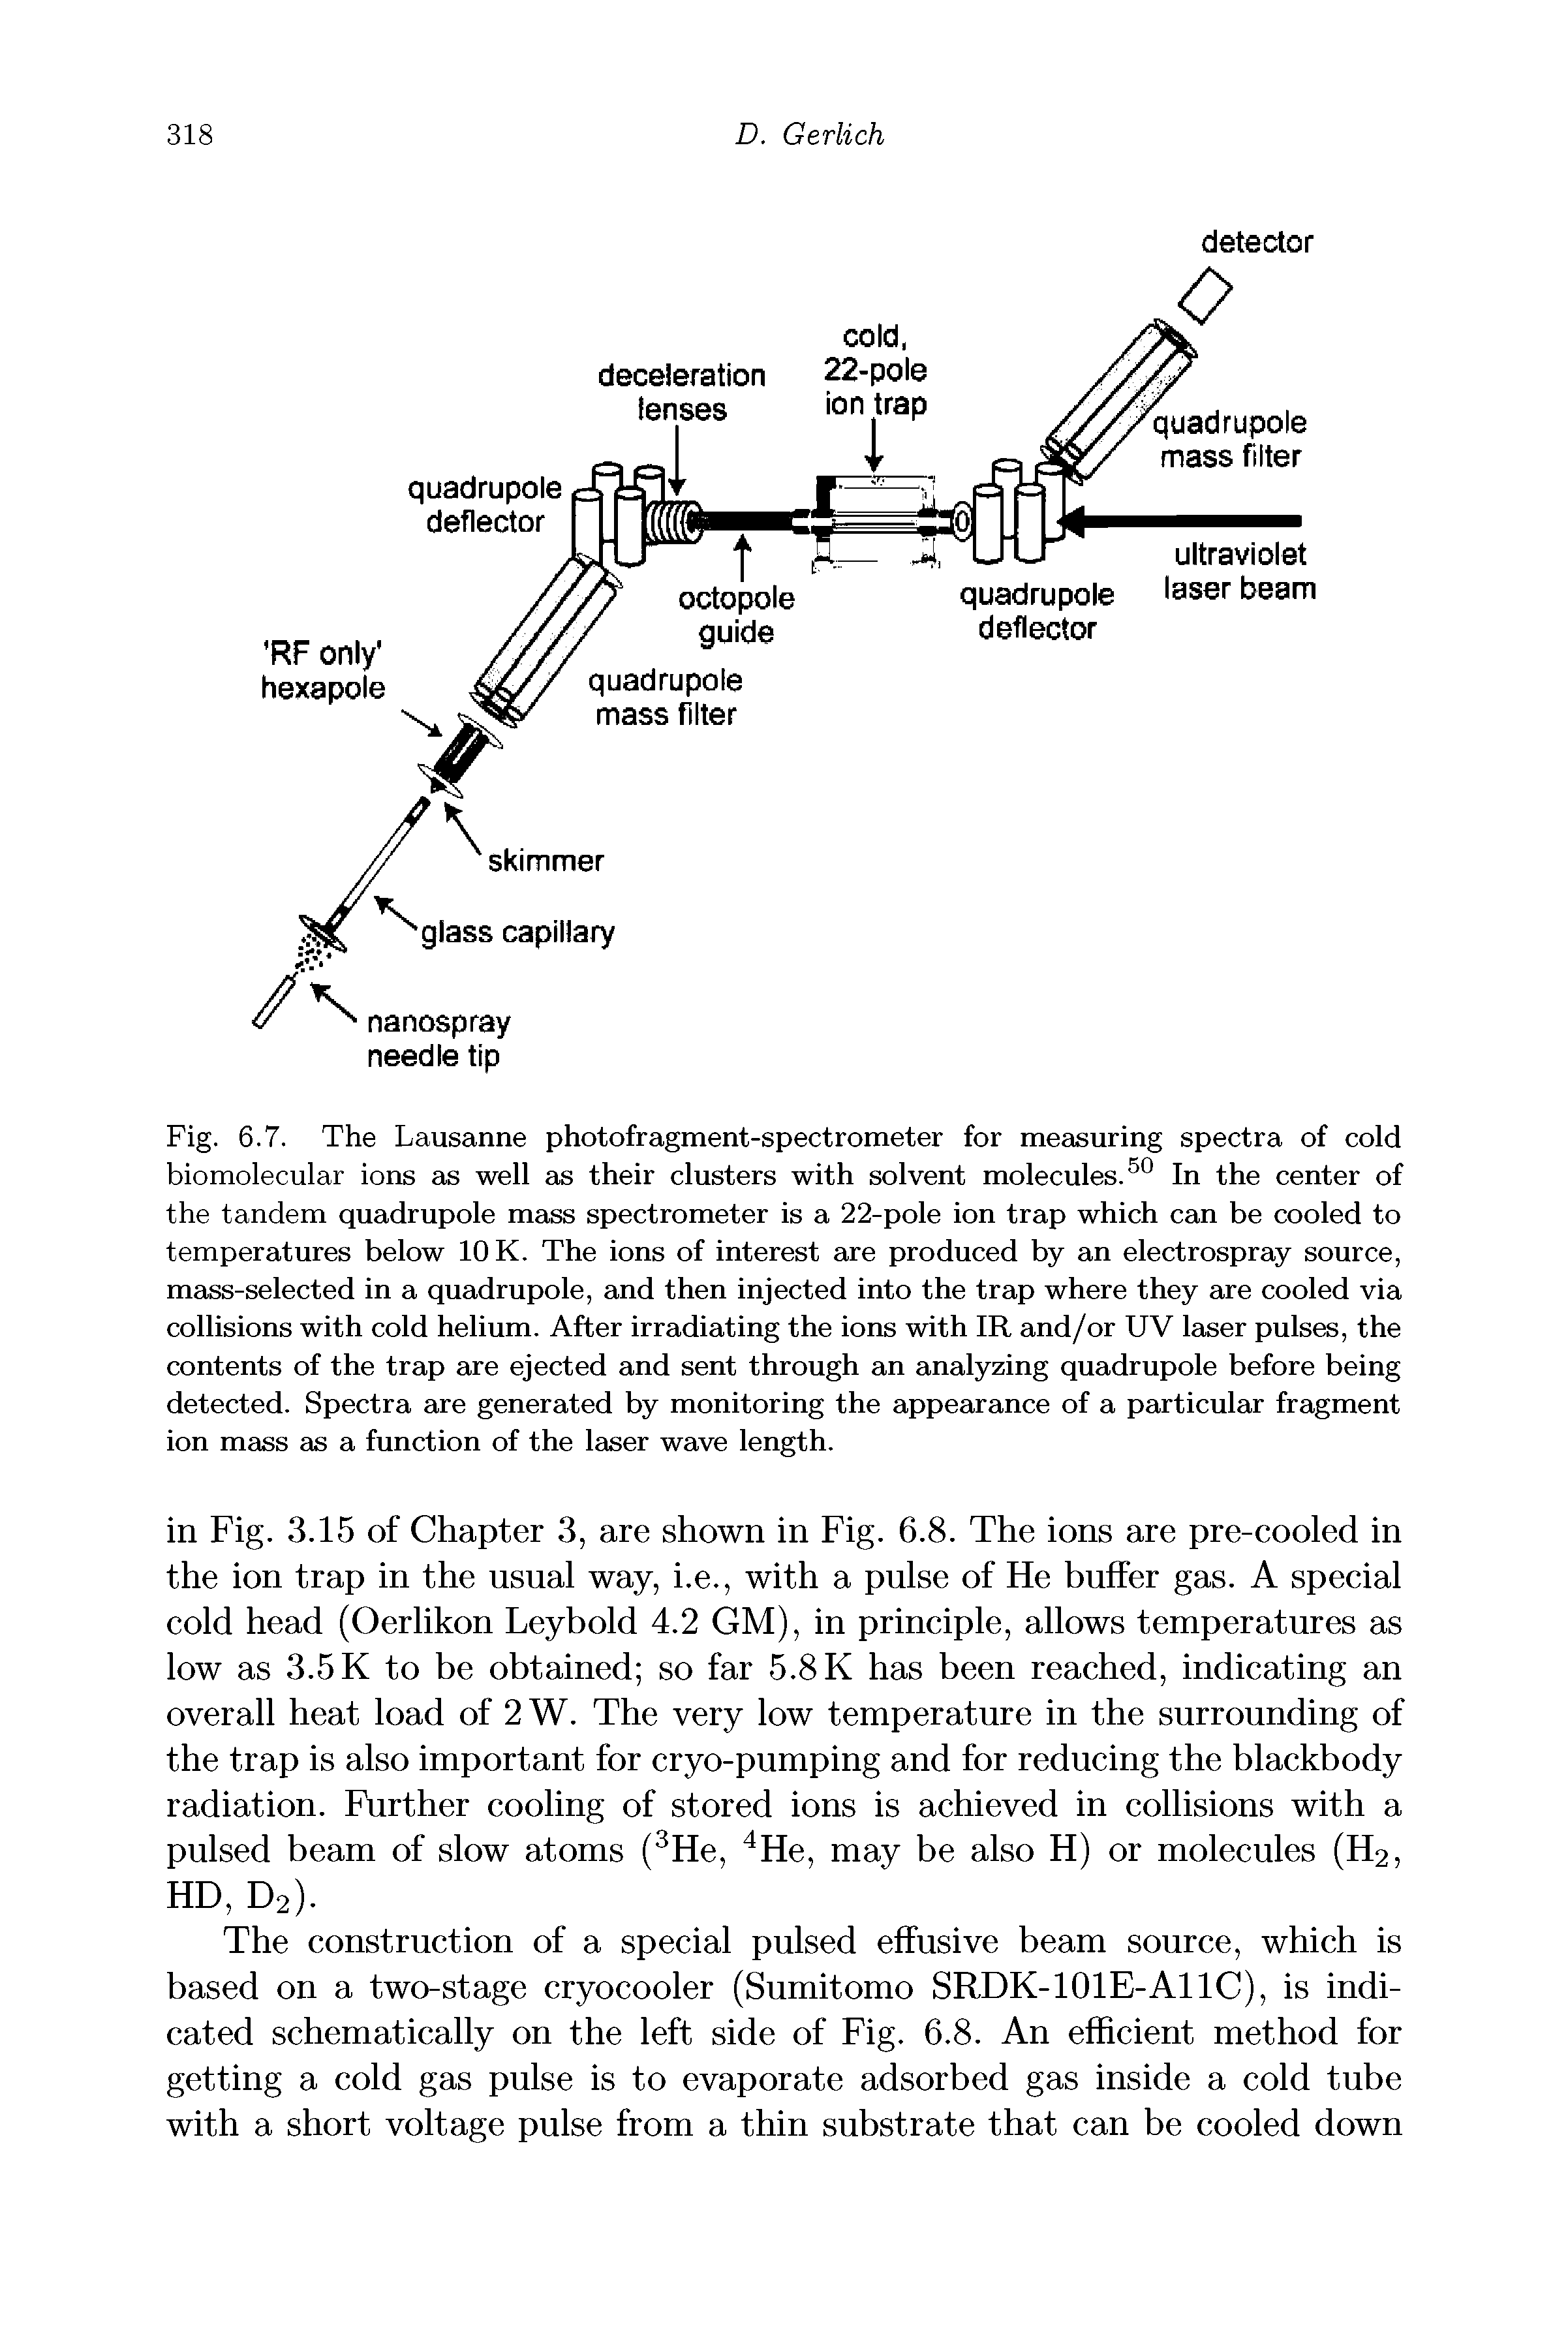 Fig. 6.7. The Lausanne photofragment-spectrometer for measuring spectra of cold biomolecular ions as well as their clusters with solvent molecules. In the center of the tandem quadrupole mass spectrometer is a 22-pole ion trap which can be cooled to temperatures below 10 K. The ions of interest are produced by an electrospray source, mass-selected in a quadrupole, and then injected into the trap where they are cooled via collisions with cold helium. After irradiating the ions with IR and/or UV laser pulses, the contents of the trap are ejected and sent through an analyzing quadrupole before being detected. Spectra are generated by monitoring the appearance of a particular fragment ion mass as a function of the laser wave length.